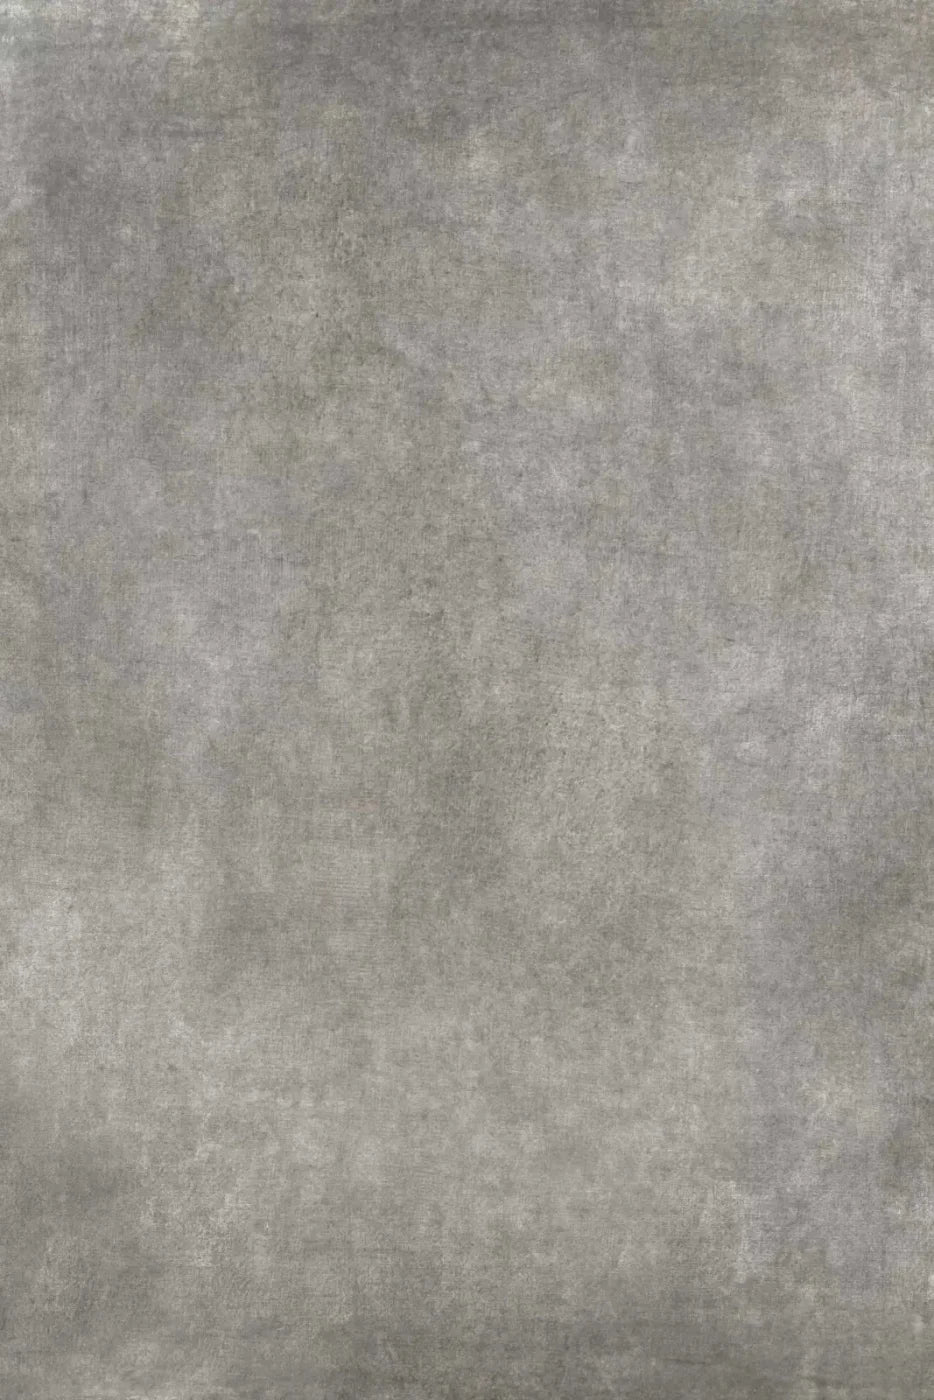 Classic Texture Medium Warm Gray 5X76 For Lvl Up Backdrop System ( 60 X 90 Inch )